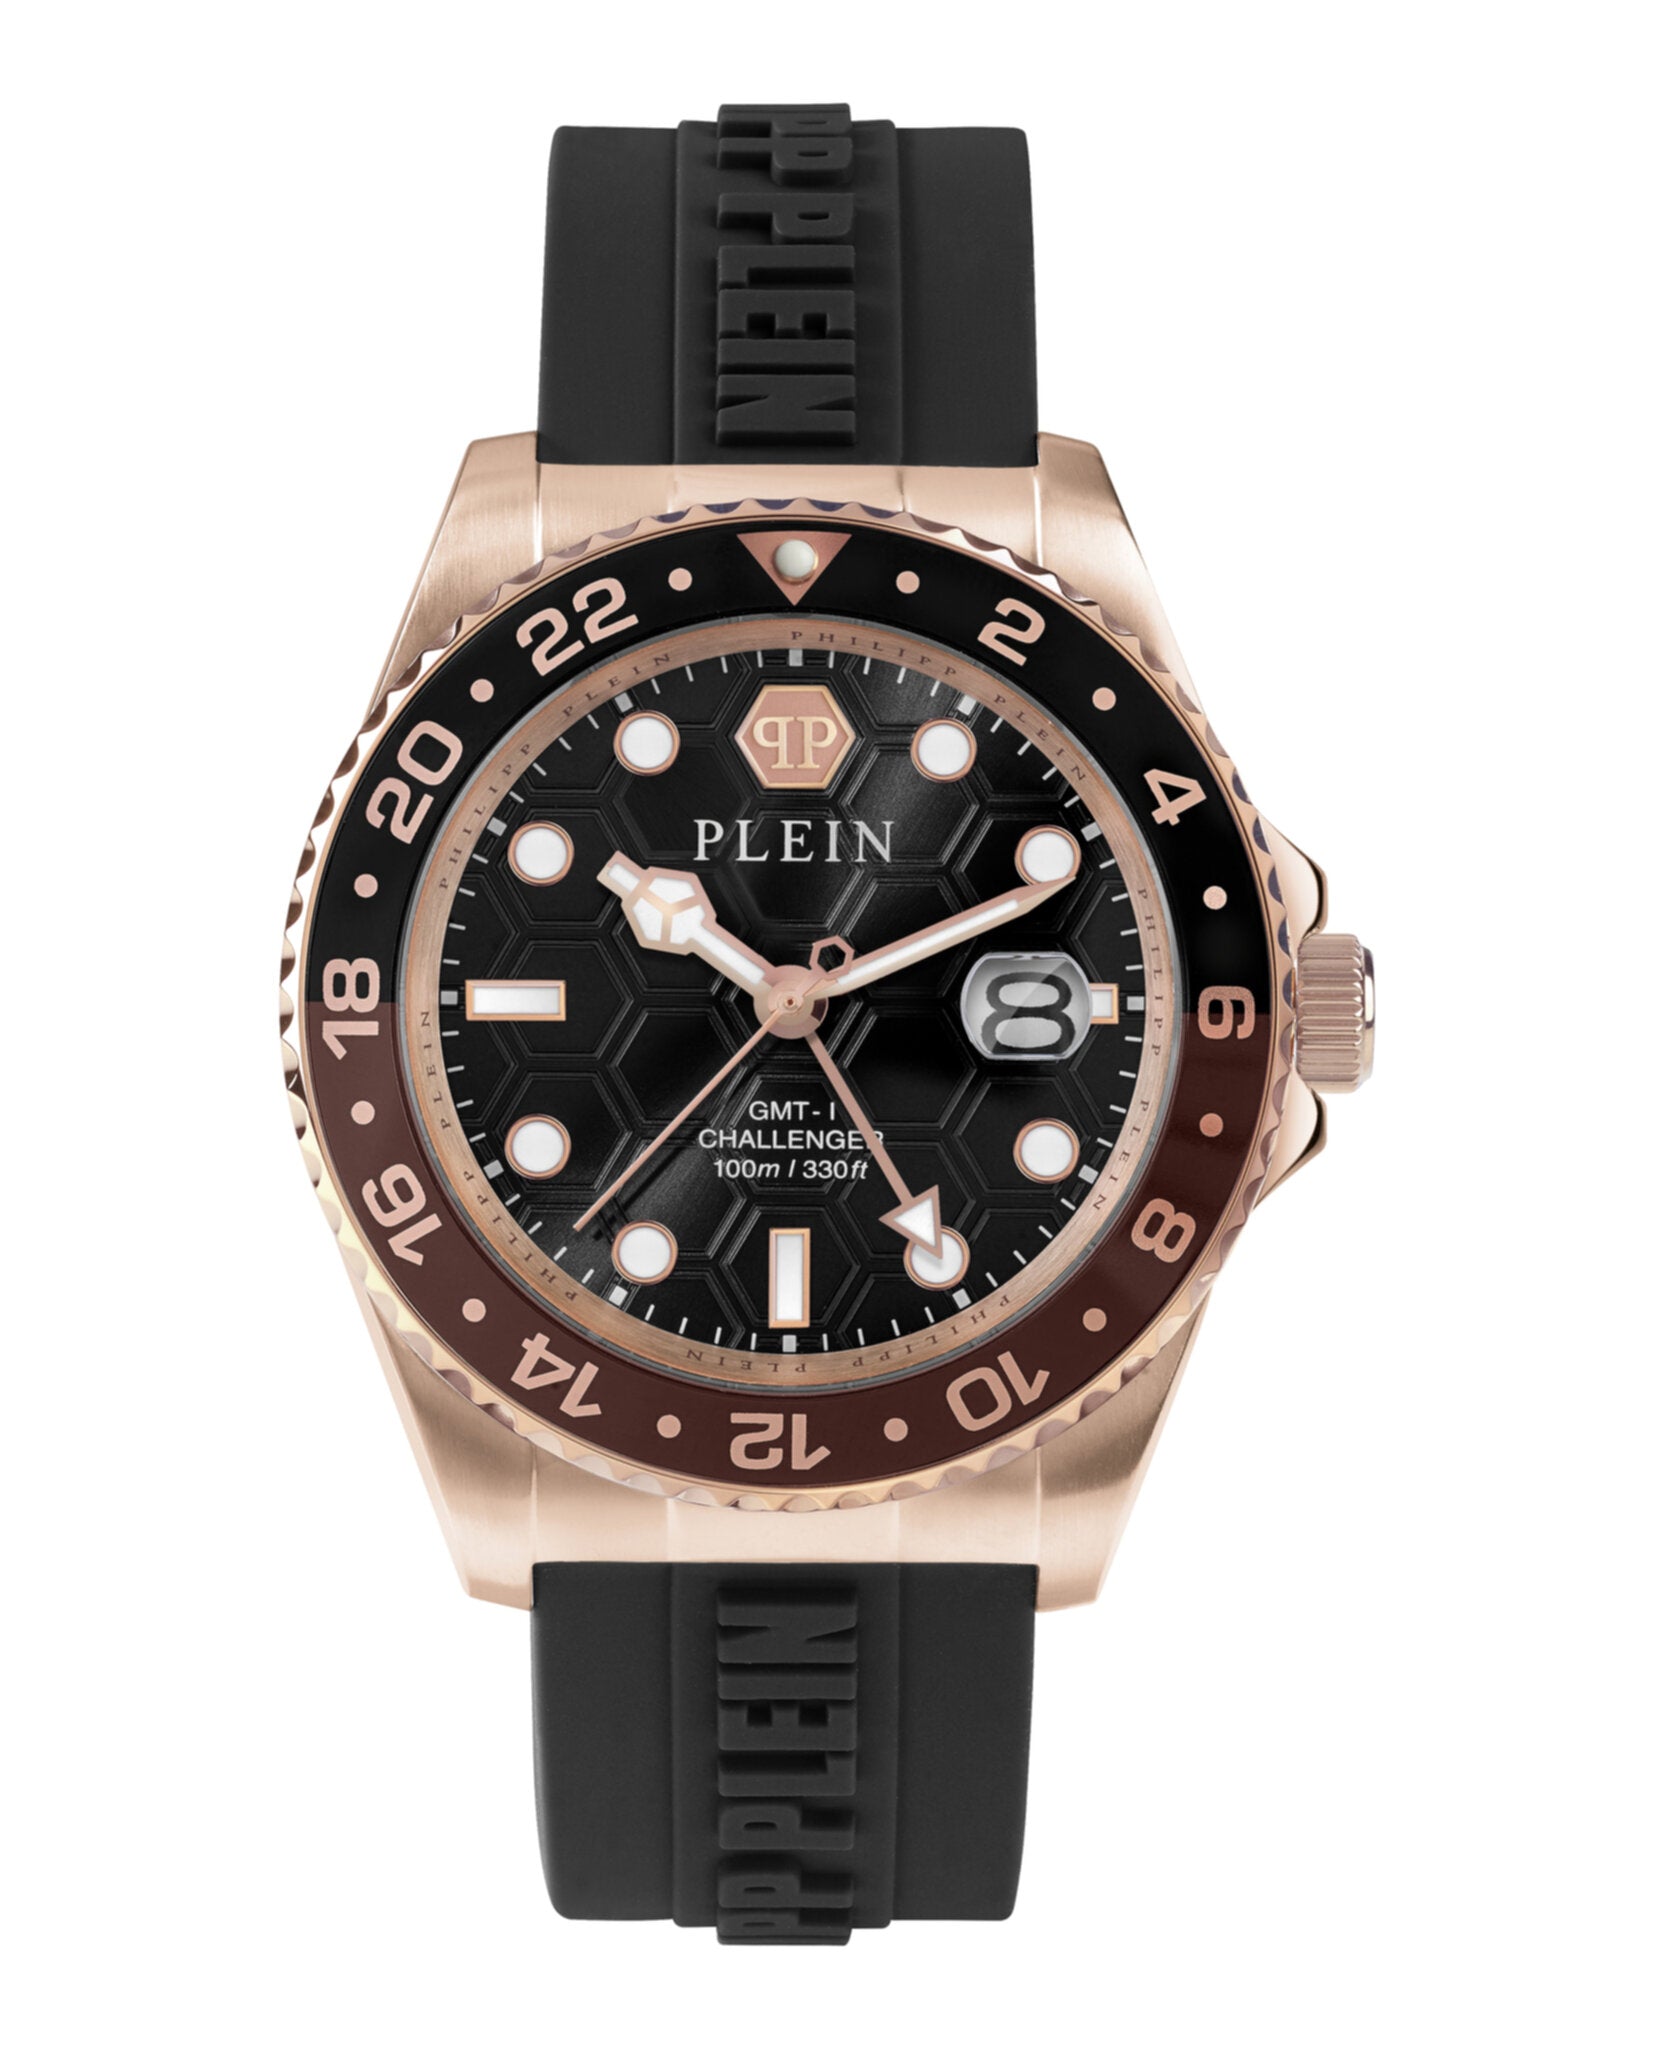 GMT-I Challenger Silicone Watch